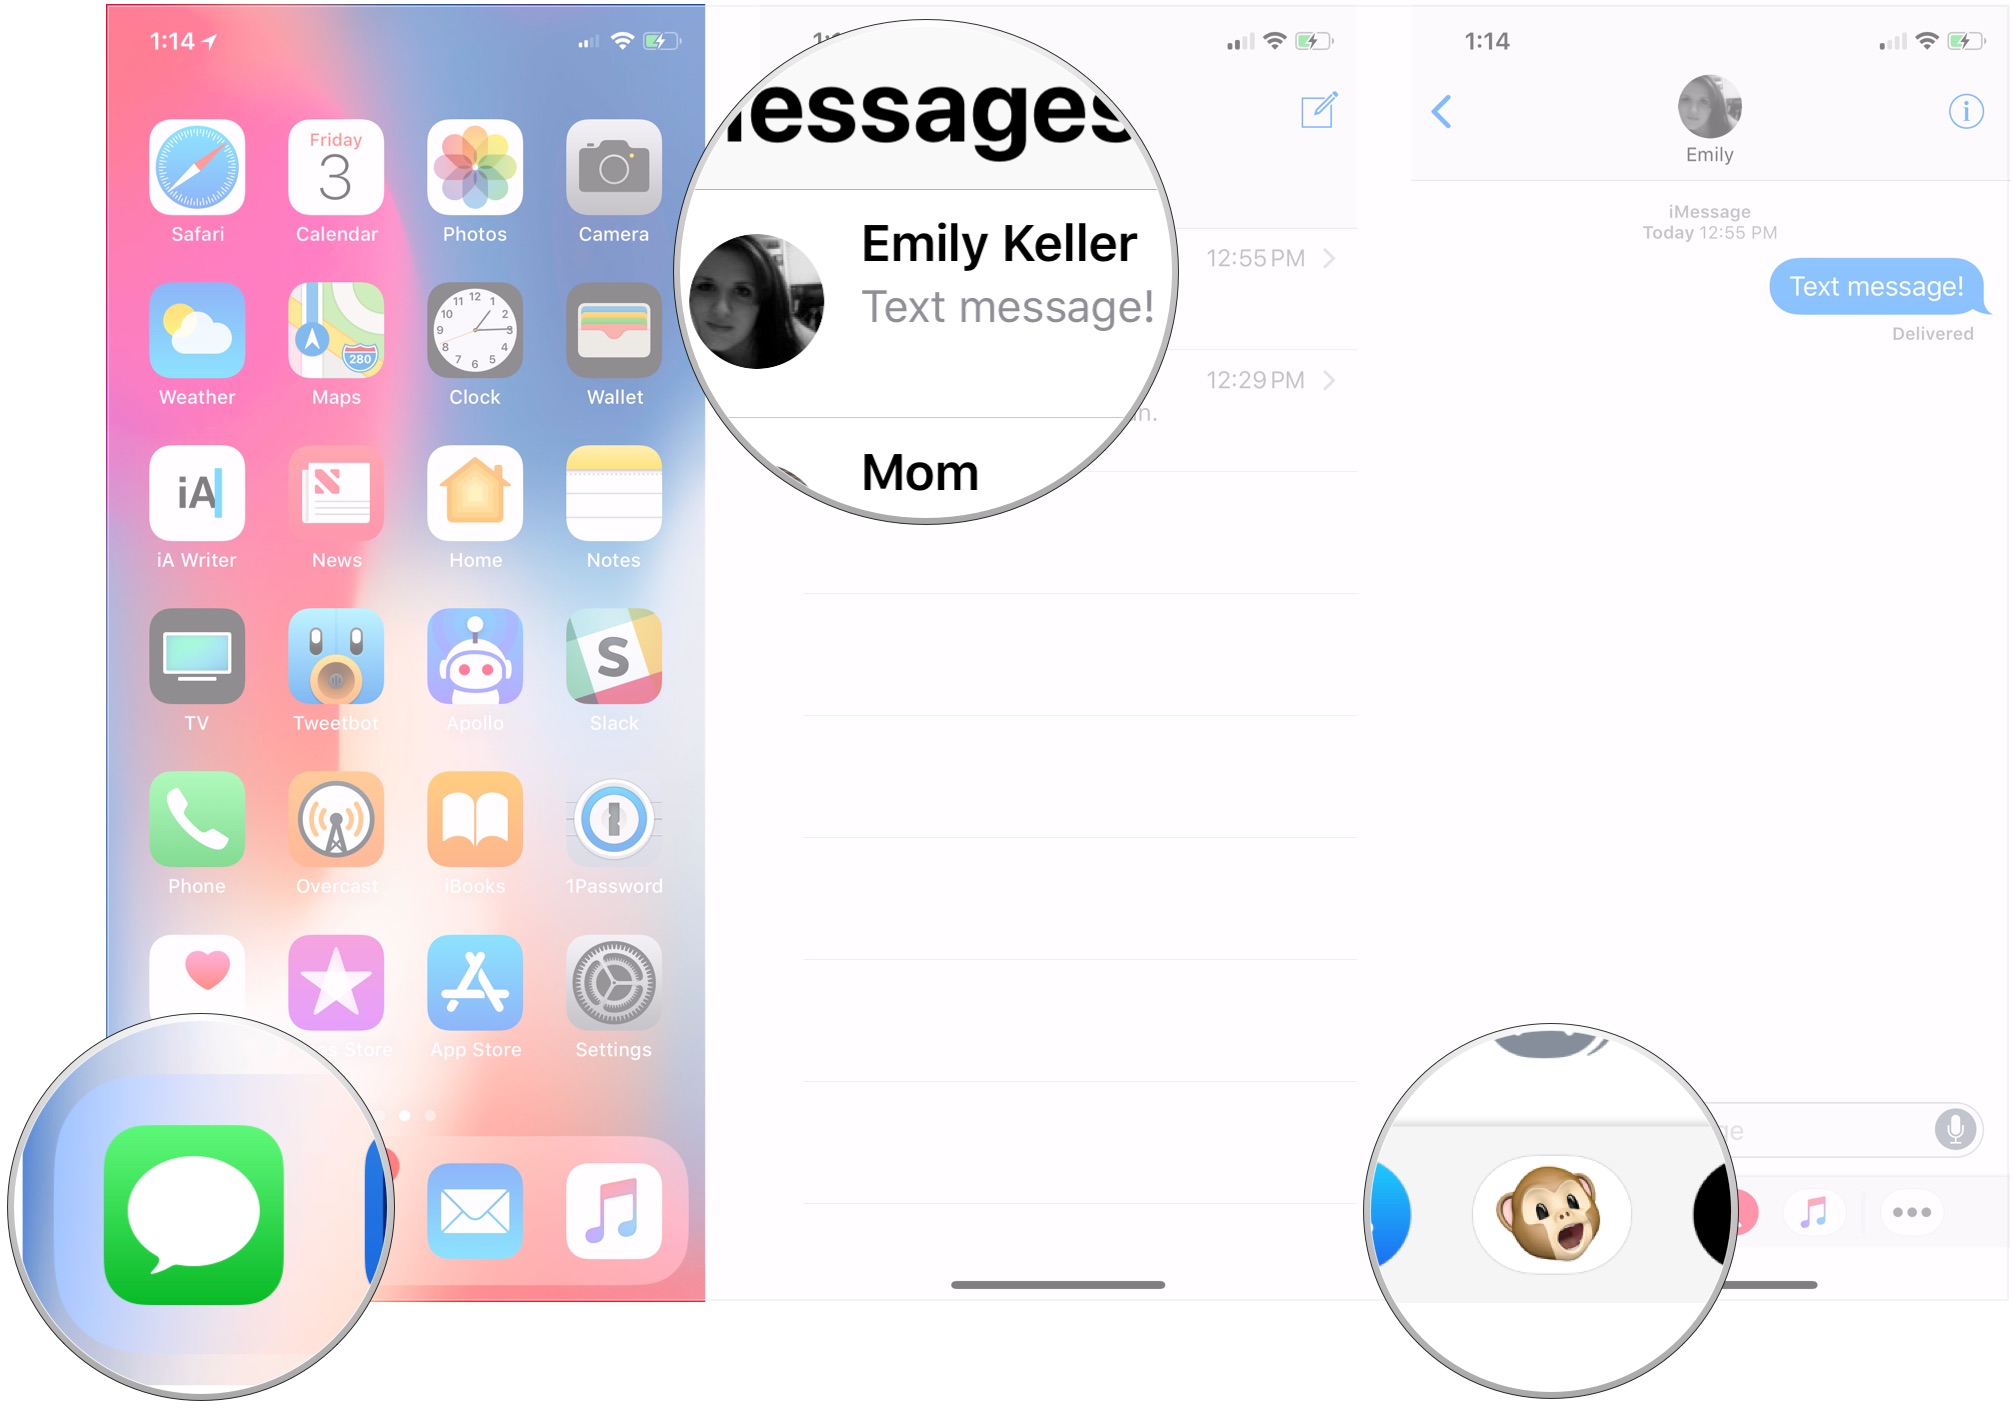 Send Animoji/Memoji, showing how to open Messages, tap a conversation, then tap the Animoji button